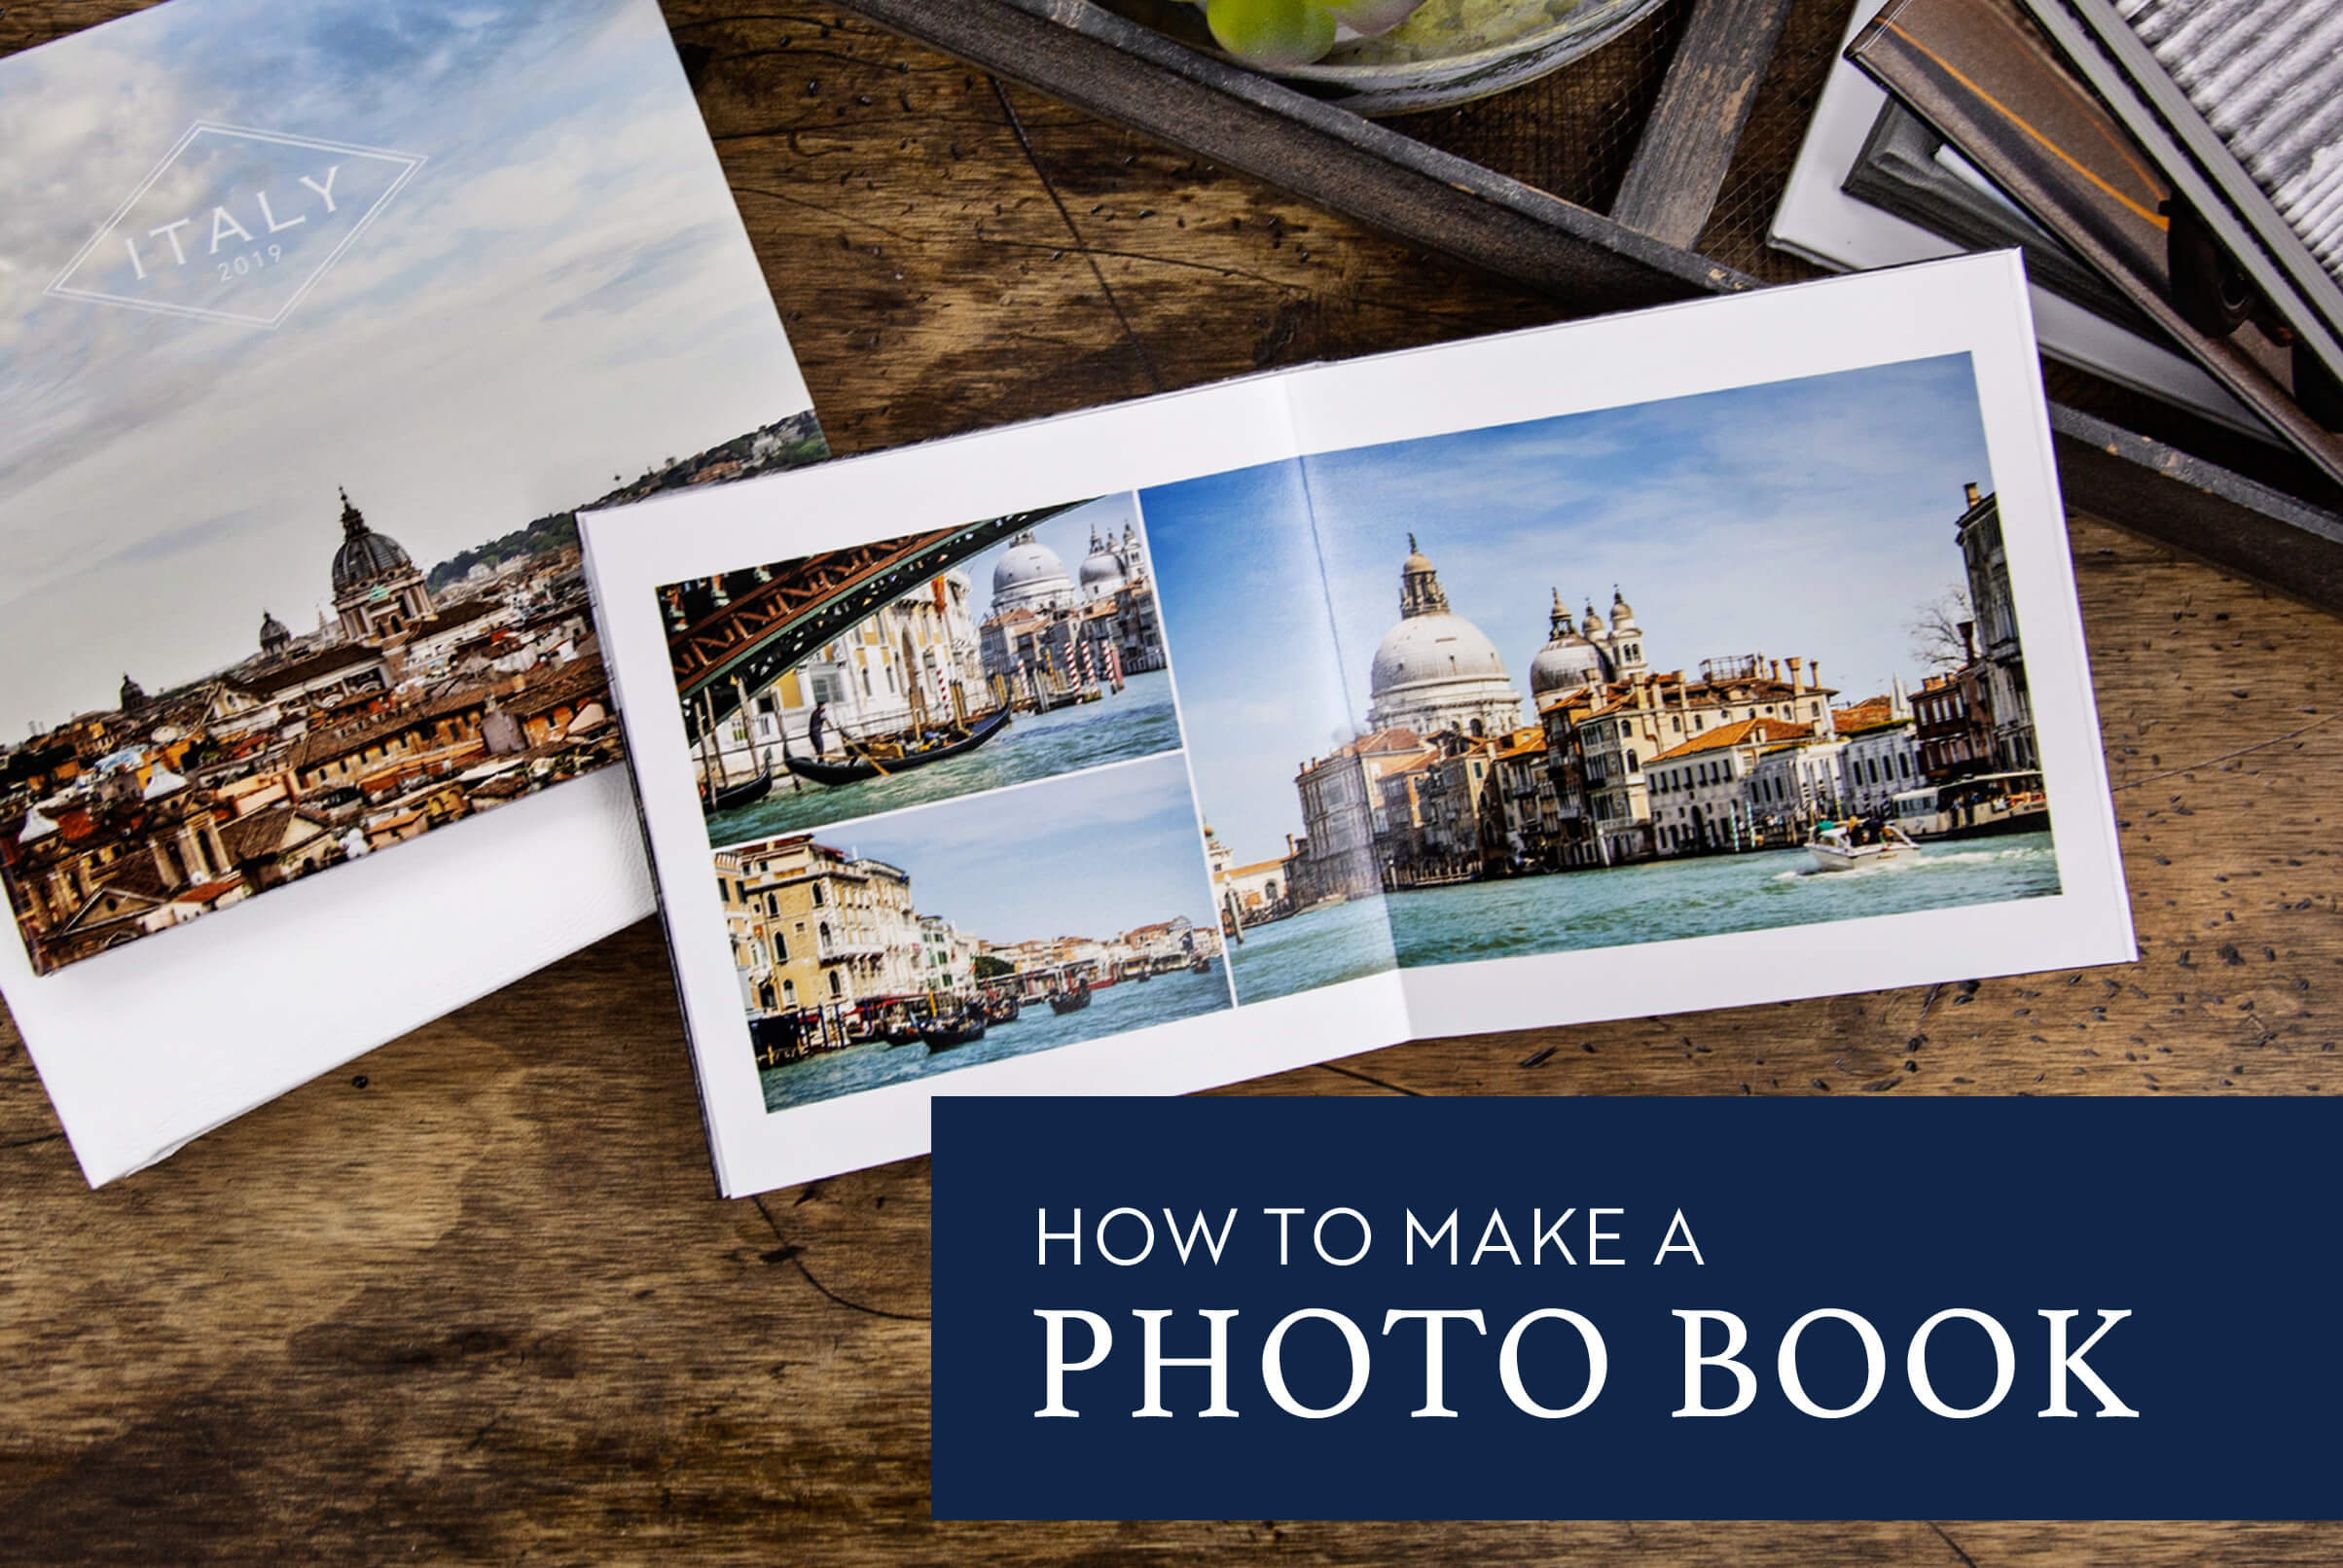 Make your own photography book